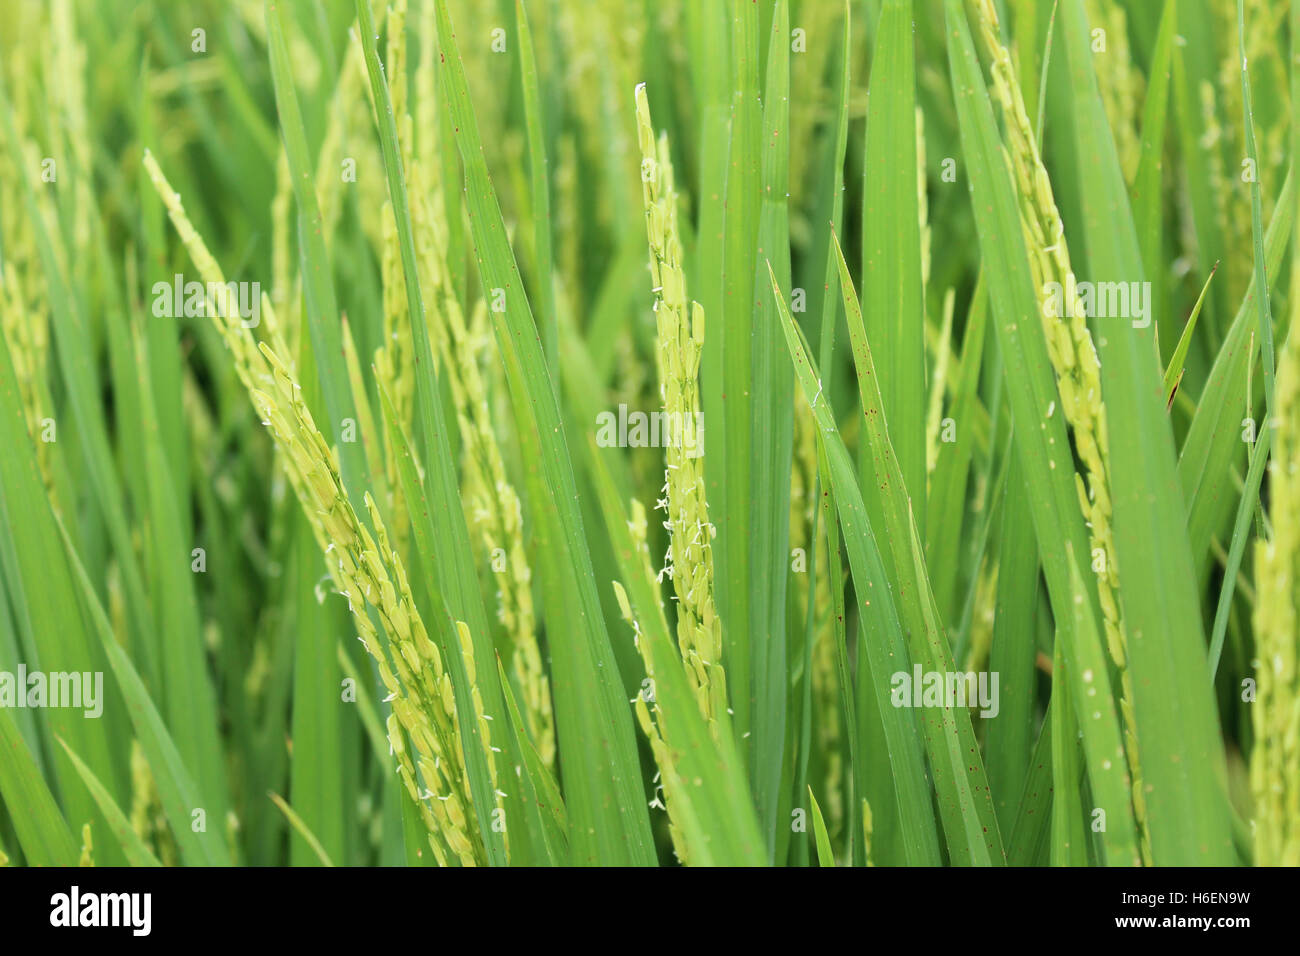 Asian crops with the small wind pollinated flowers is called a "spikelet" at Sekinchan, Malaysia Stock Photo